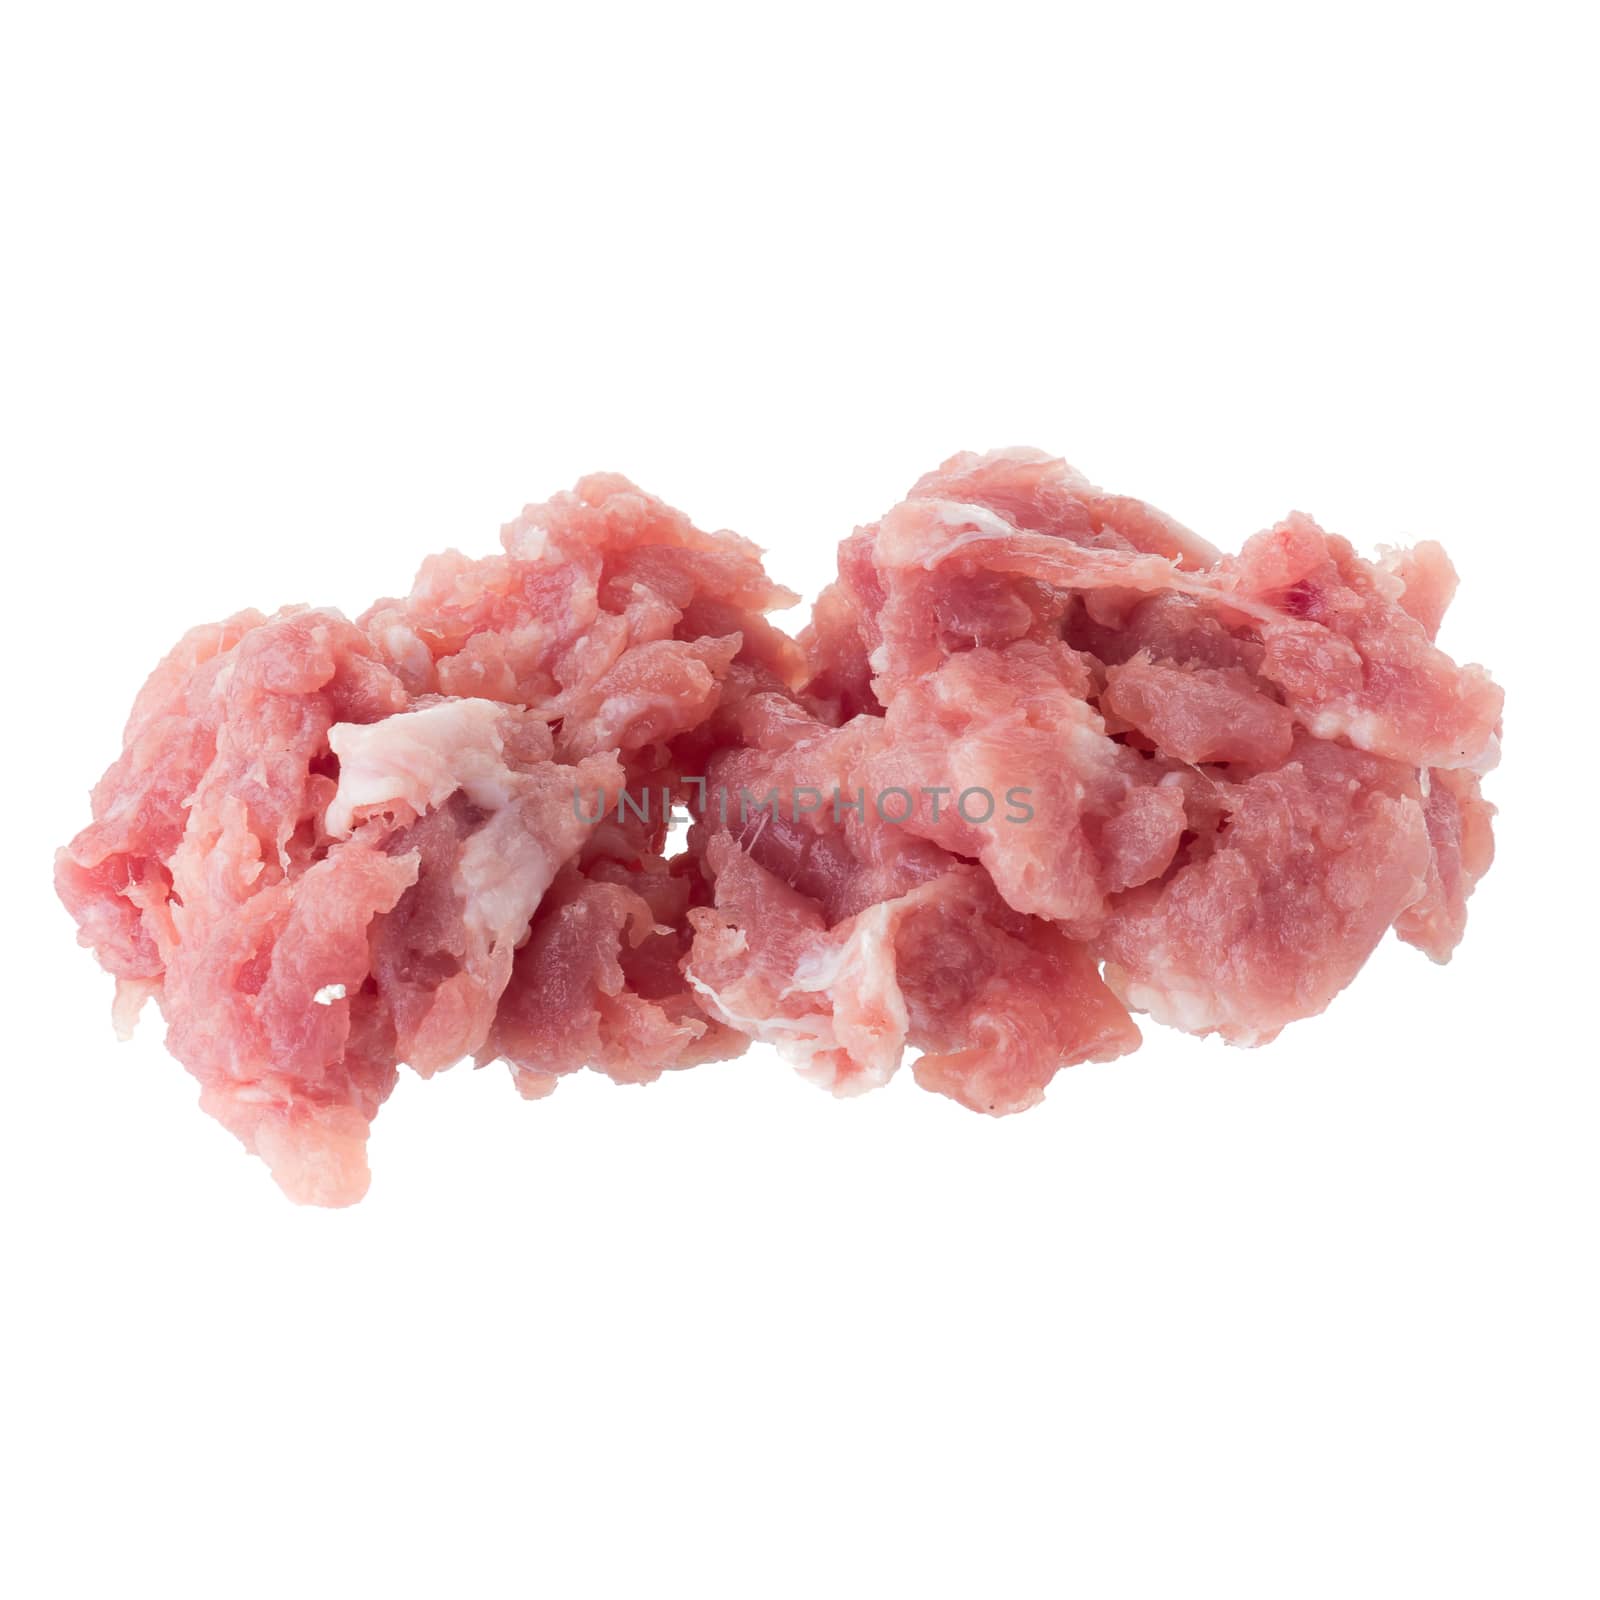 minced pork isolated on a white background.